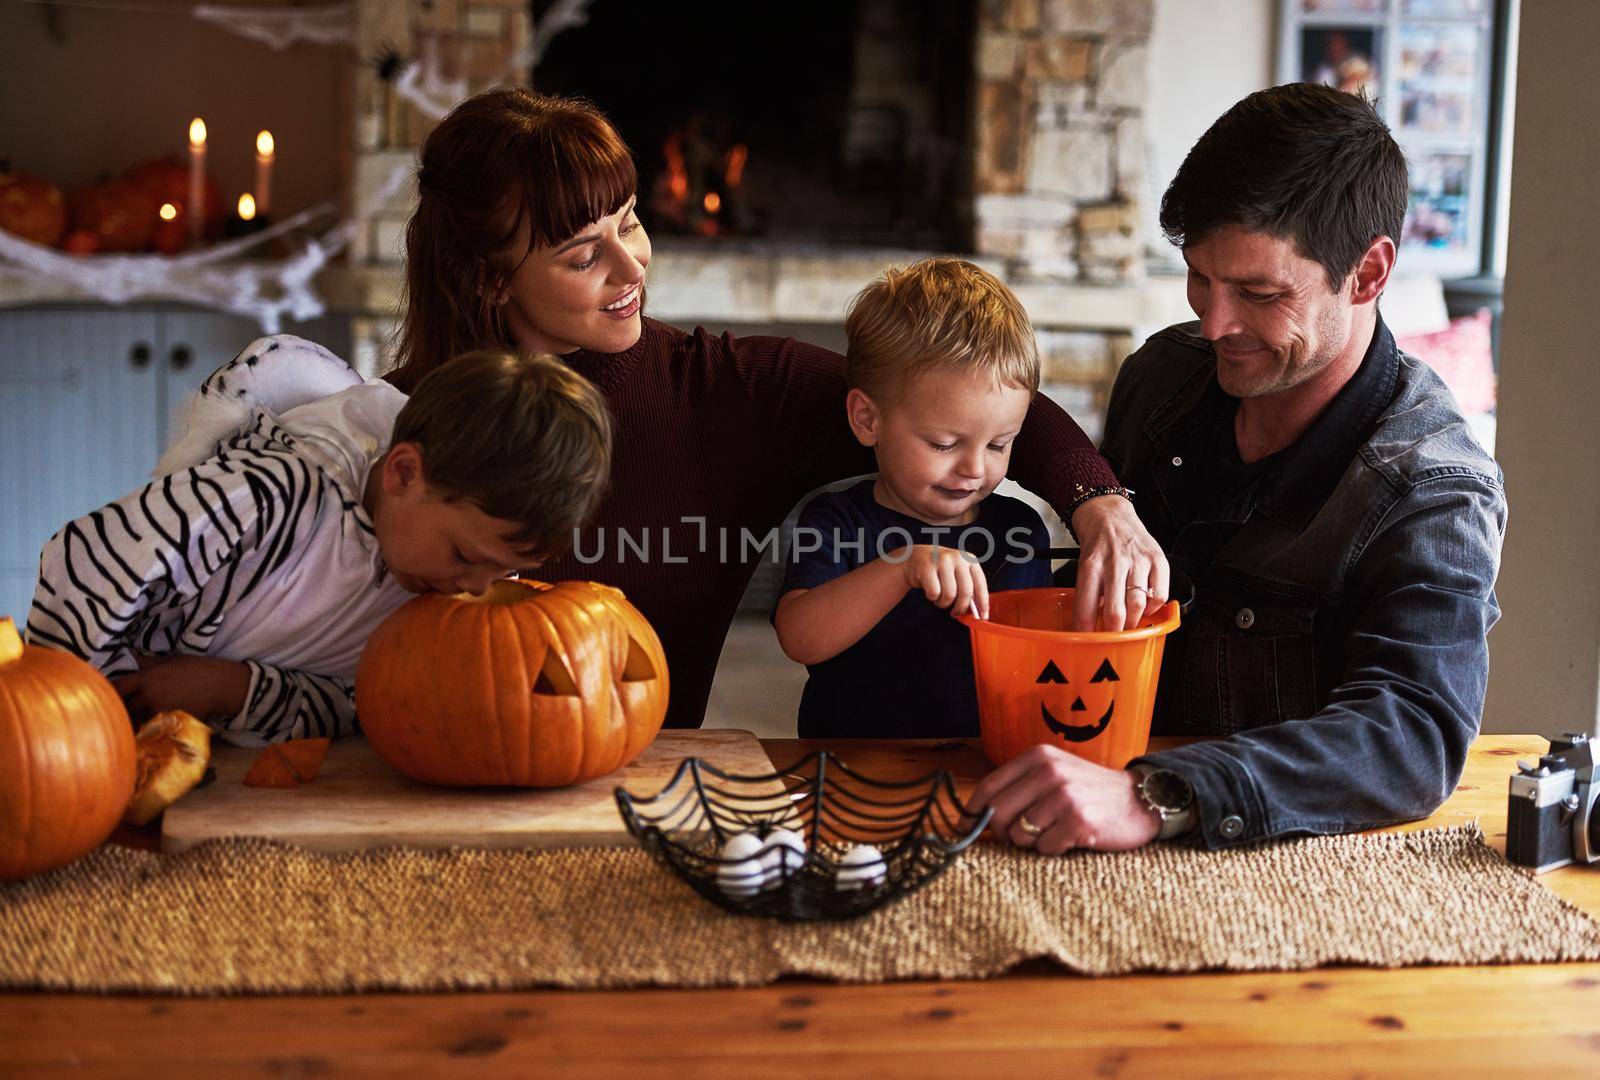 Shot of an adorable young family carving out pumpkins and celebrating halloween together at home.